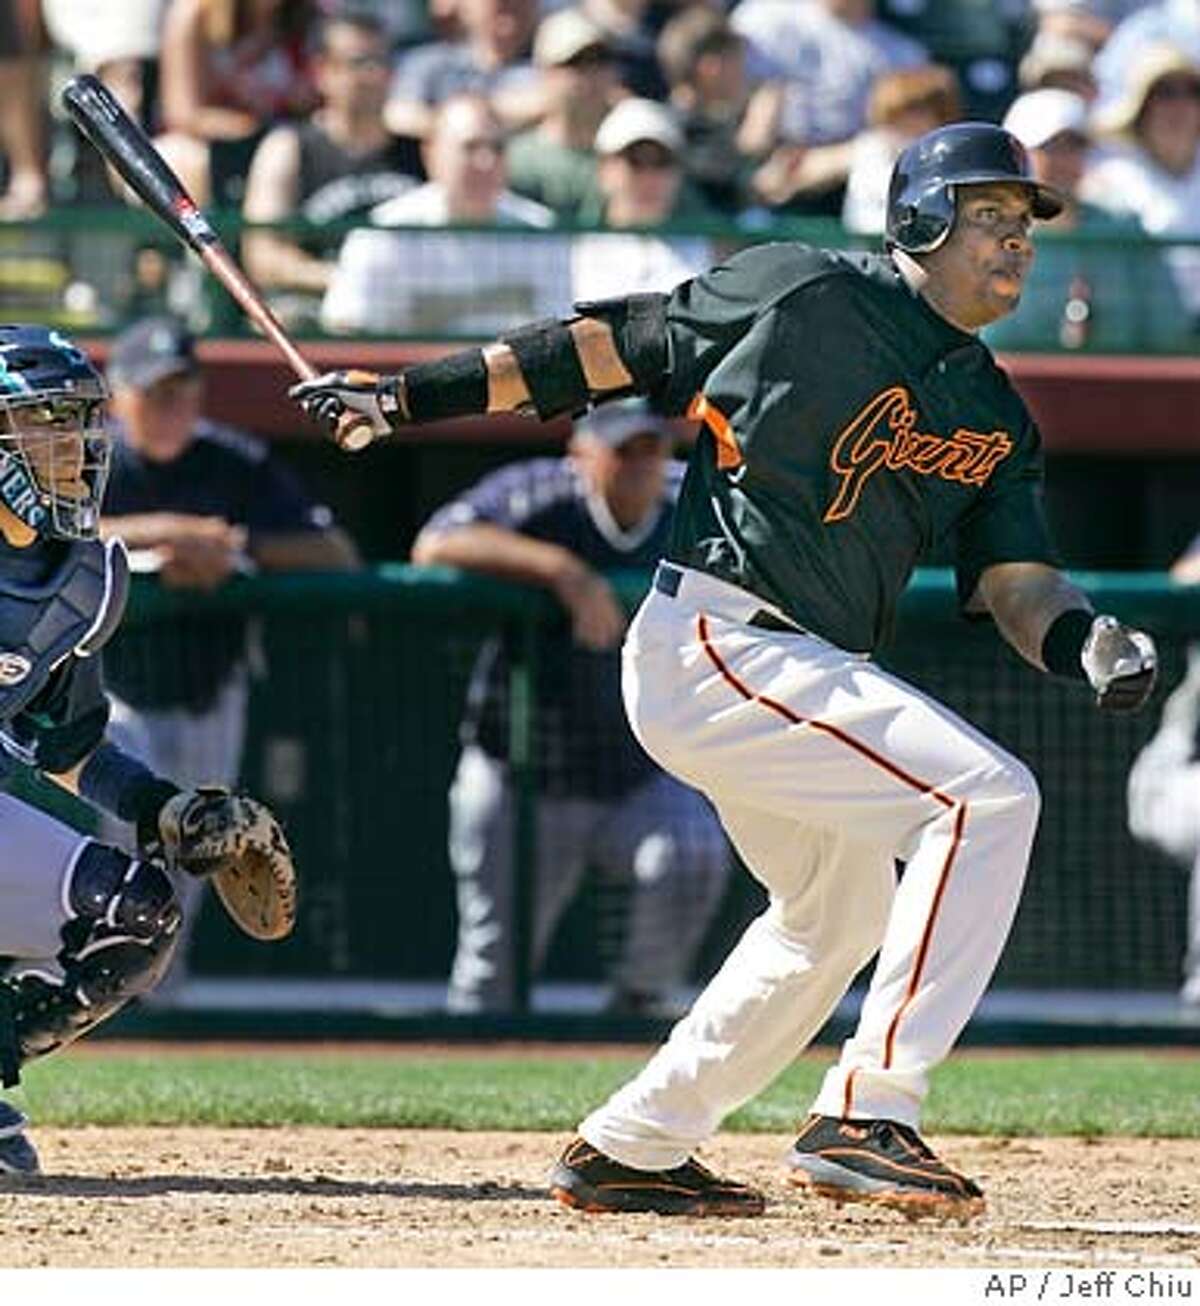 San Francisco Giants' Barry Bonds swings on his fielder's choice against the Seattle Mariners in the fourth inning of a spring training baseball game in Scottsdale, Ariz., Sunday, March 11, 2007. (AP Photo/Jeff Chiu)